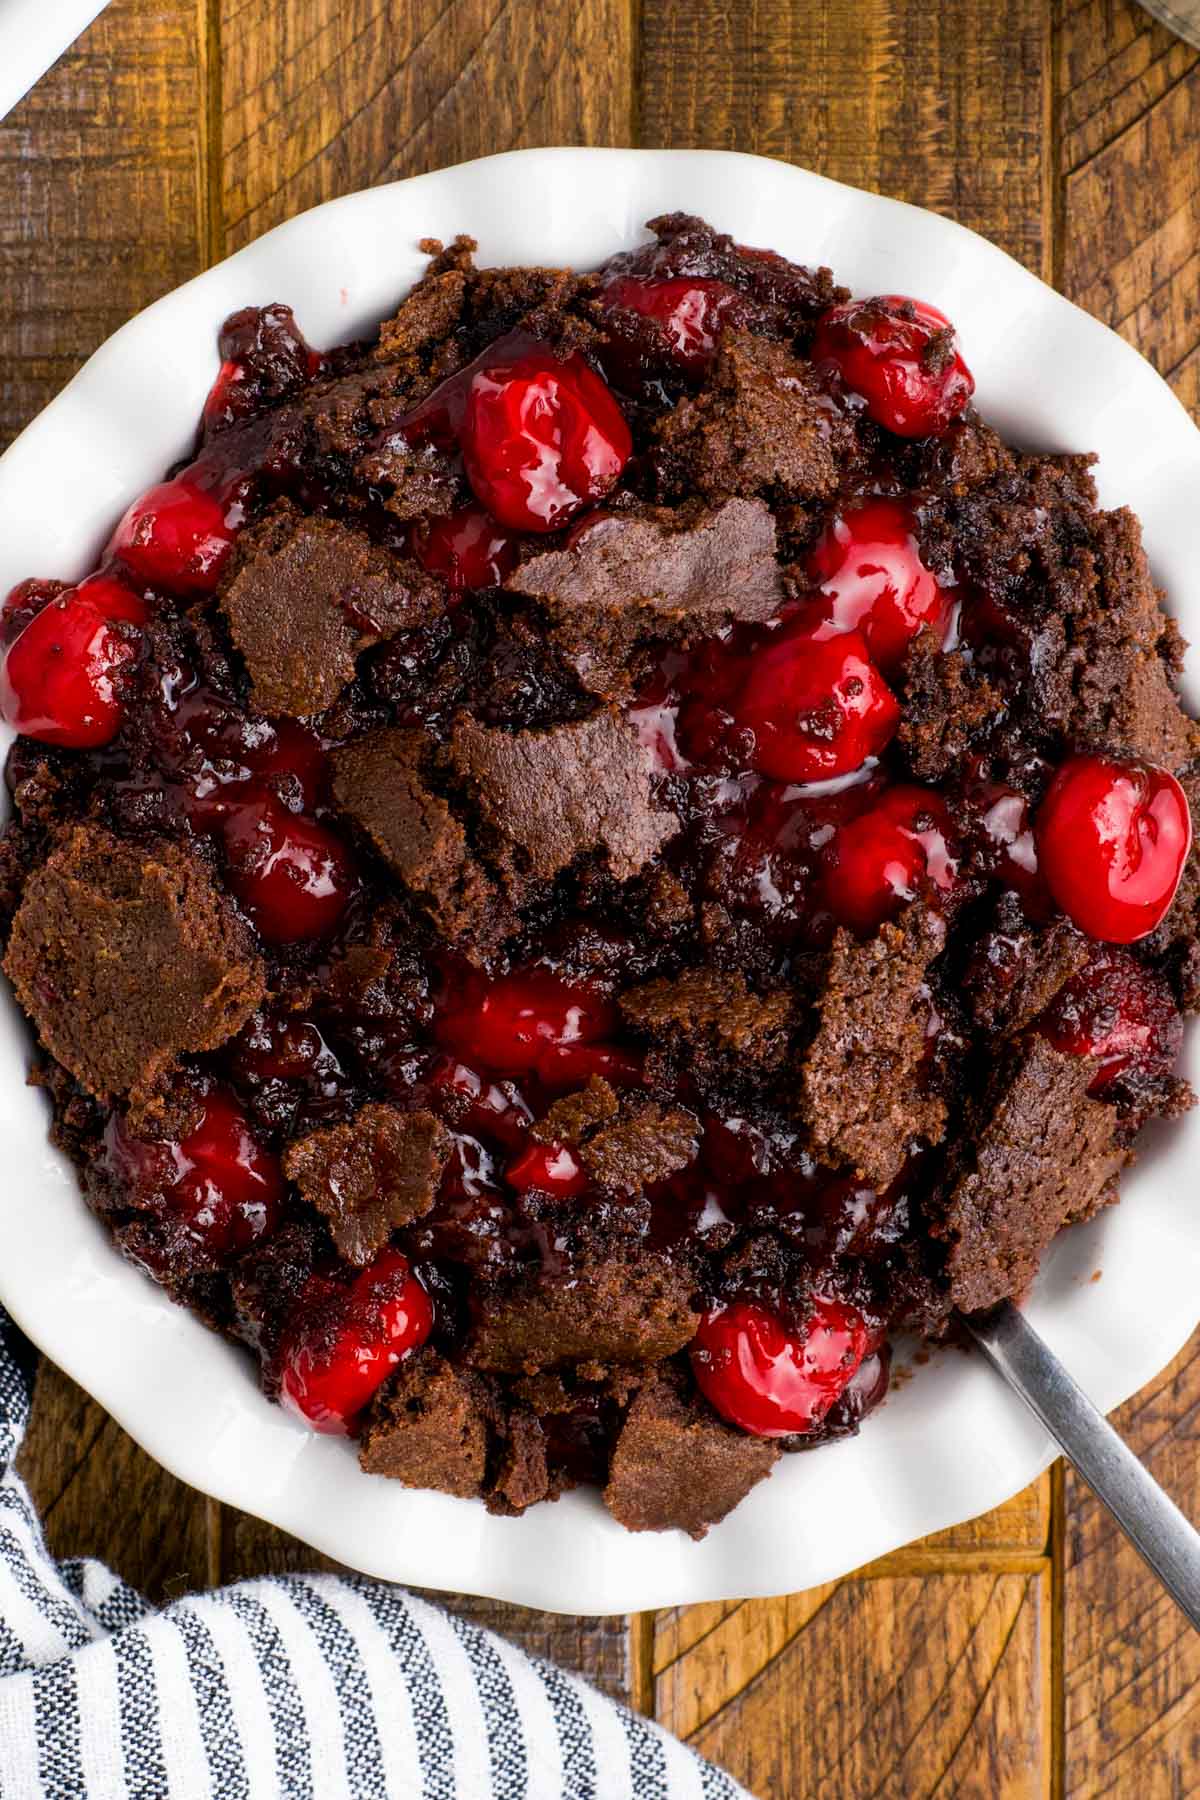 Shallow serving bowl with chocolate cake and cherry pie filling.